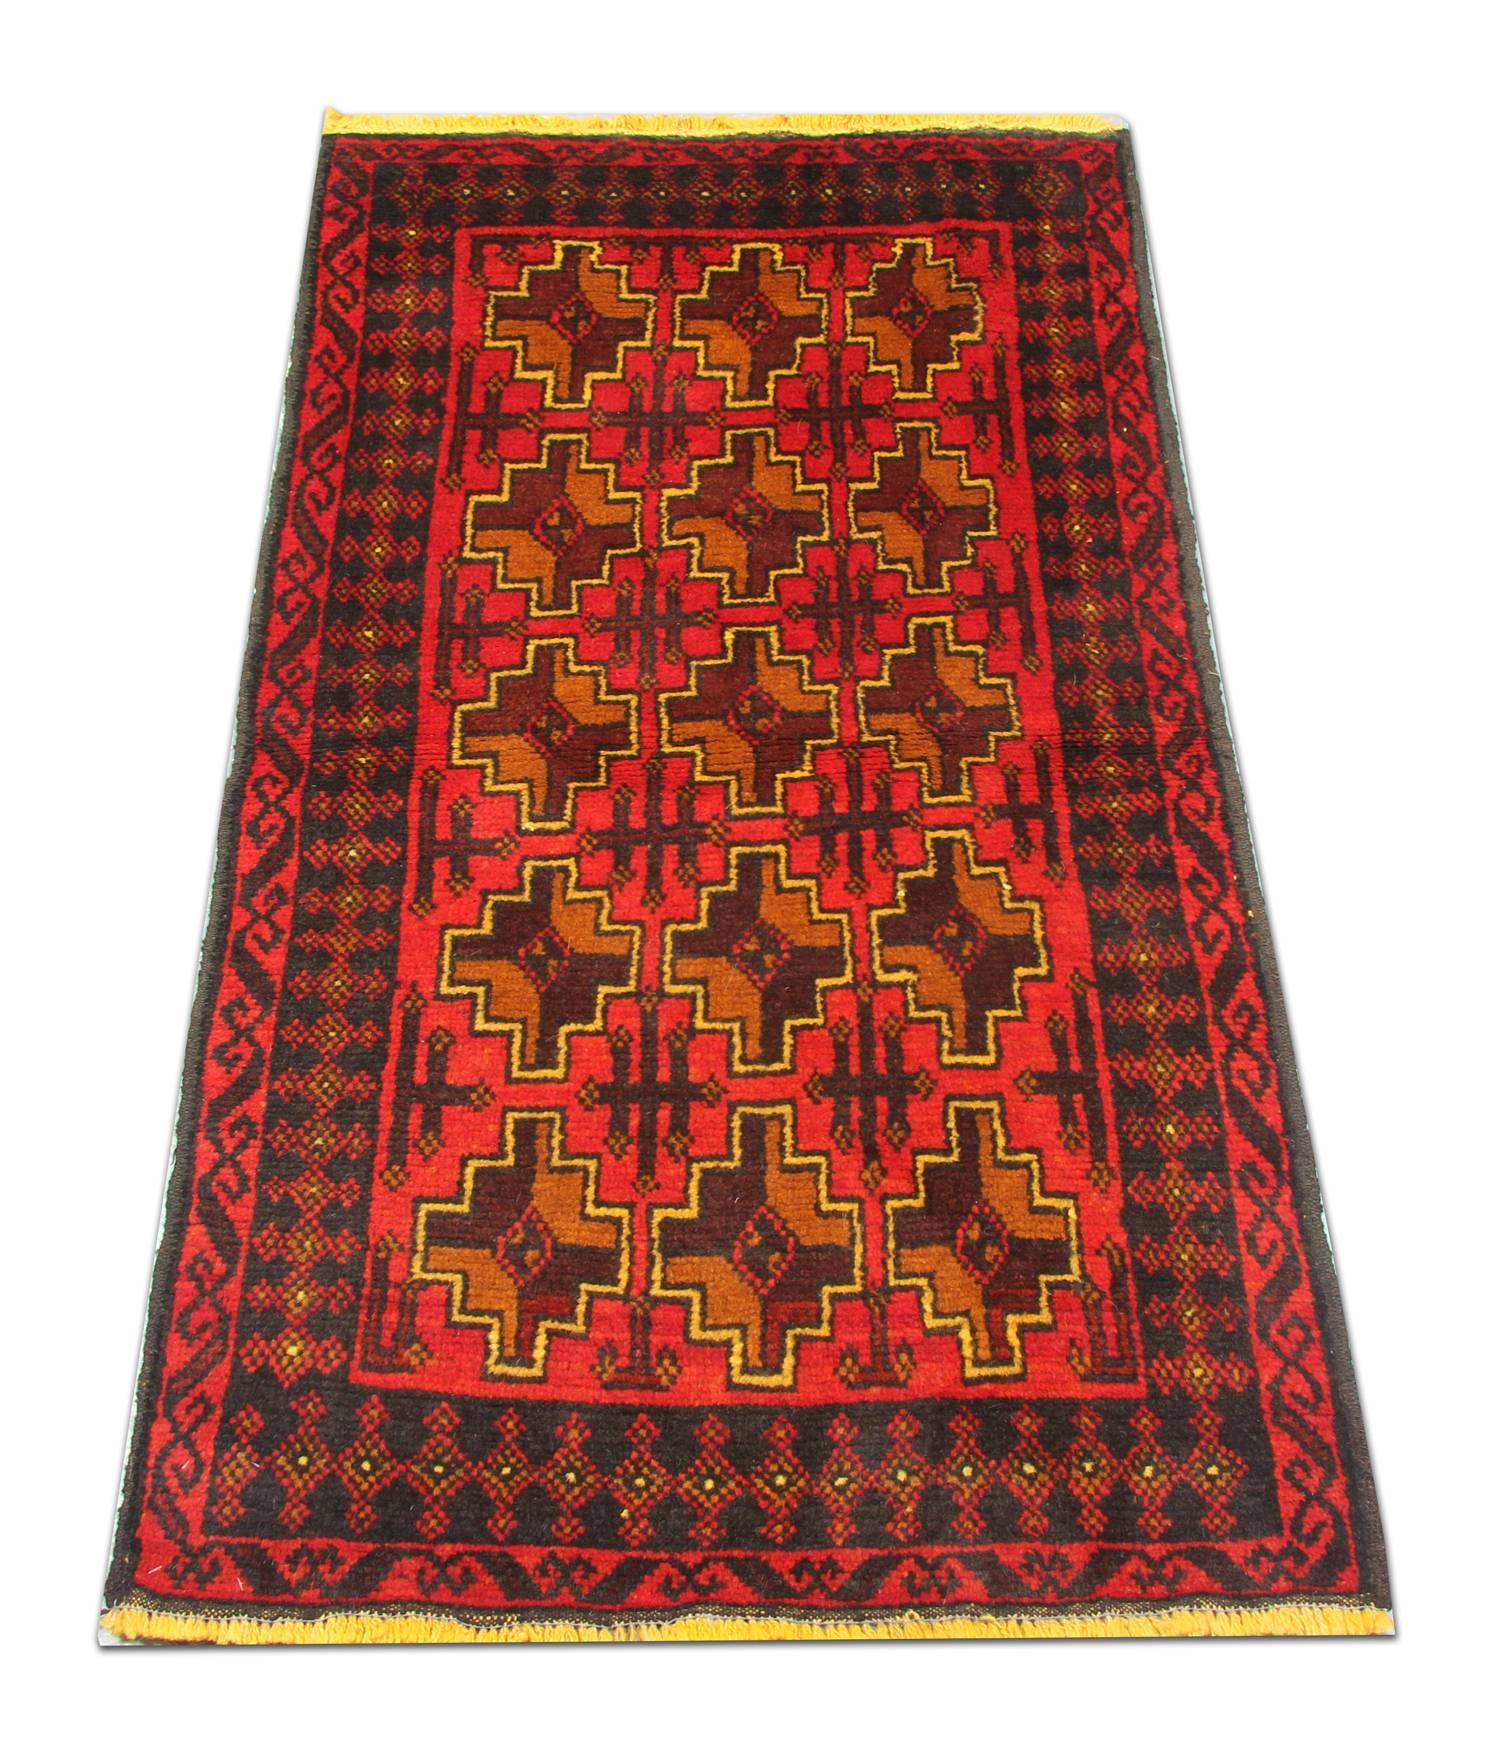 This elegant handwoven are rug has been constructed with an all-over central design with simple medallions woven in an asymmetrical design. It features a red background and mustard and brown accents that make up the geometric motifs. This is then